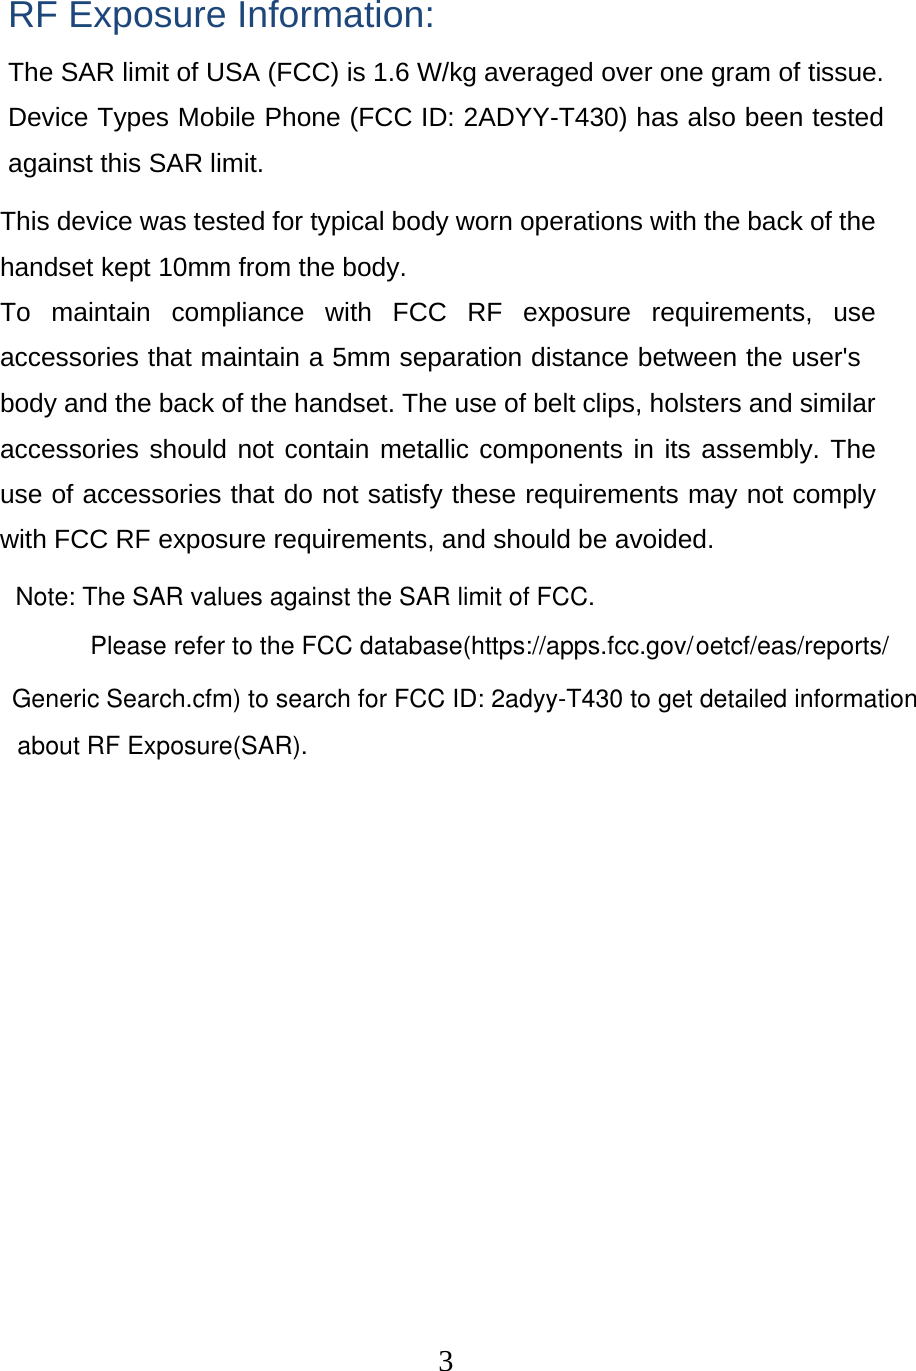  3 RF Exposure Information: The SAR limit of USA (FCC) is 1.6 W/kg averaged over one gram of tissue. Device Types Mobile Phone (FCC ID: 2ADYY-T430) has also been tested against this SAR limit. This device was tested for typical body worn operations with the back of the handset kept 10mm from the body. To maintain compliance with FCC RF exposure requirements, use accessories that maintain a 5mm separation distance between the user&apos;s body and the back of the handset. The use of belt clips, holsters and similar accessories should not contain metallic components in its assembly. The use of accessories that do not satisfy these requirements may not comply with FCC RF exposure requirements, and should be avoided. Note: The SAR values against the SAR limit of FCC.Please refer to the FCC database(https://apps.fcc.gov/oetcf/eas/reports/Generic Search.cfm) to search for FCC ID: 2adyy-T430 to get detailed informationabout RF Exposure(SAR).